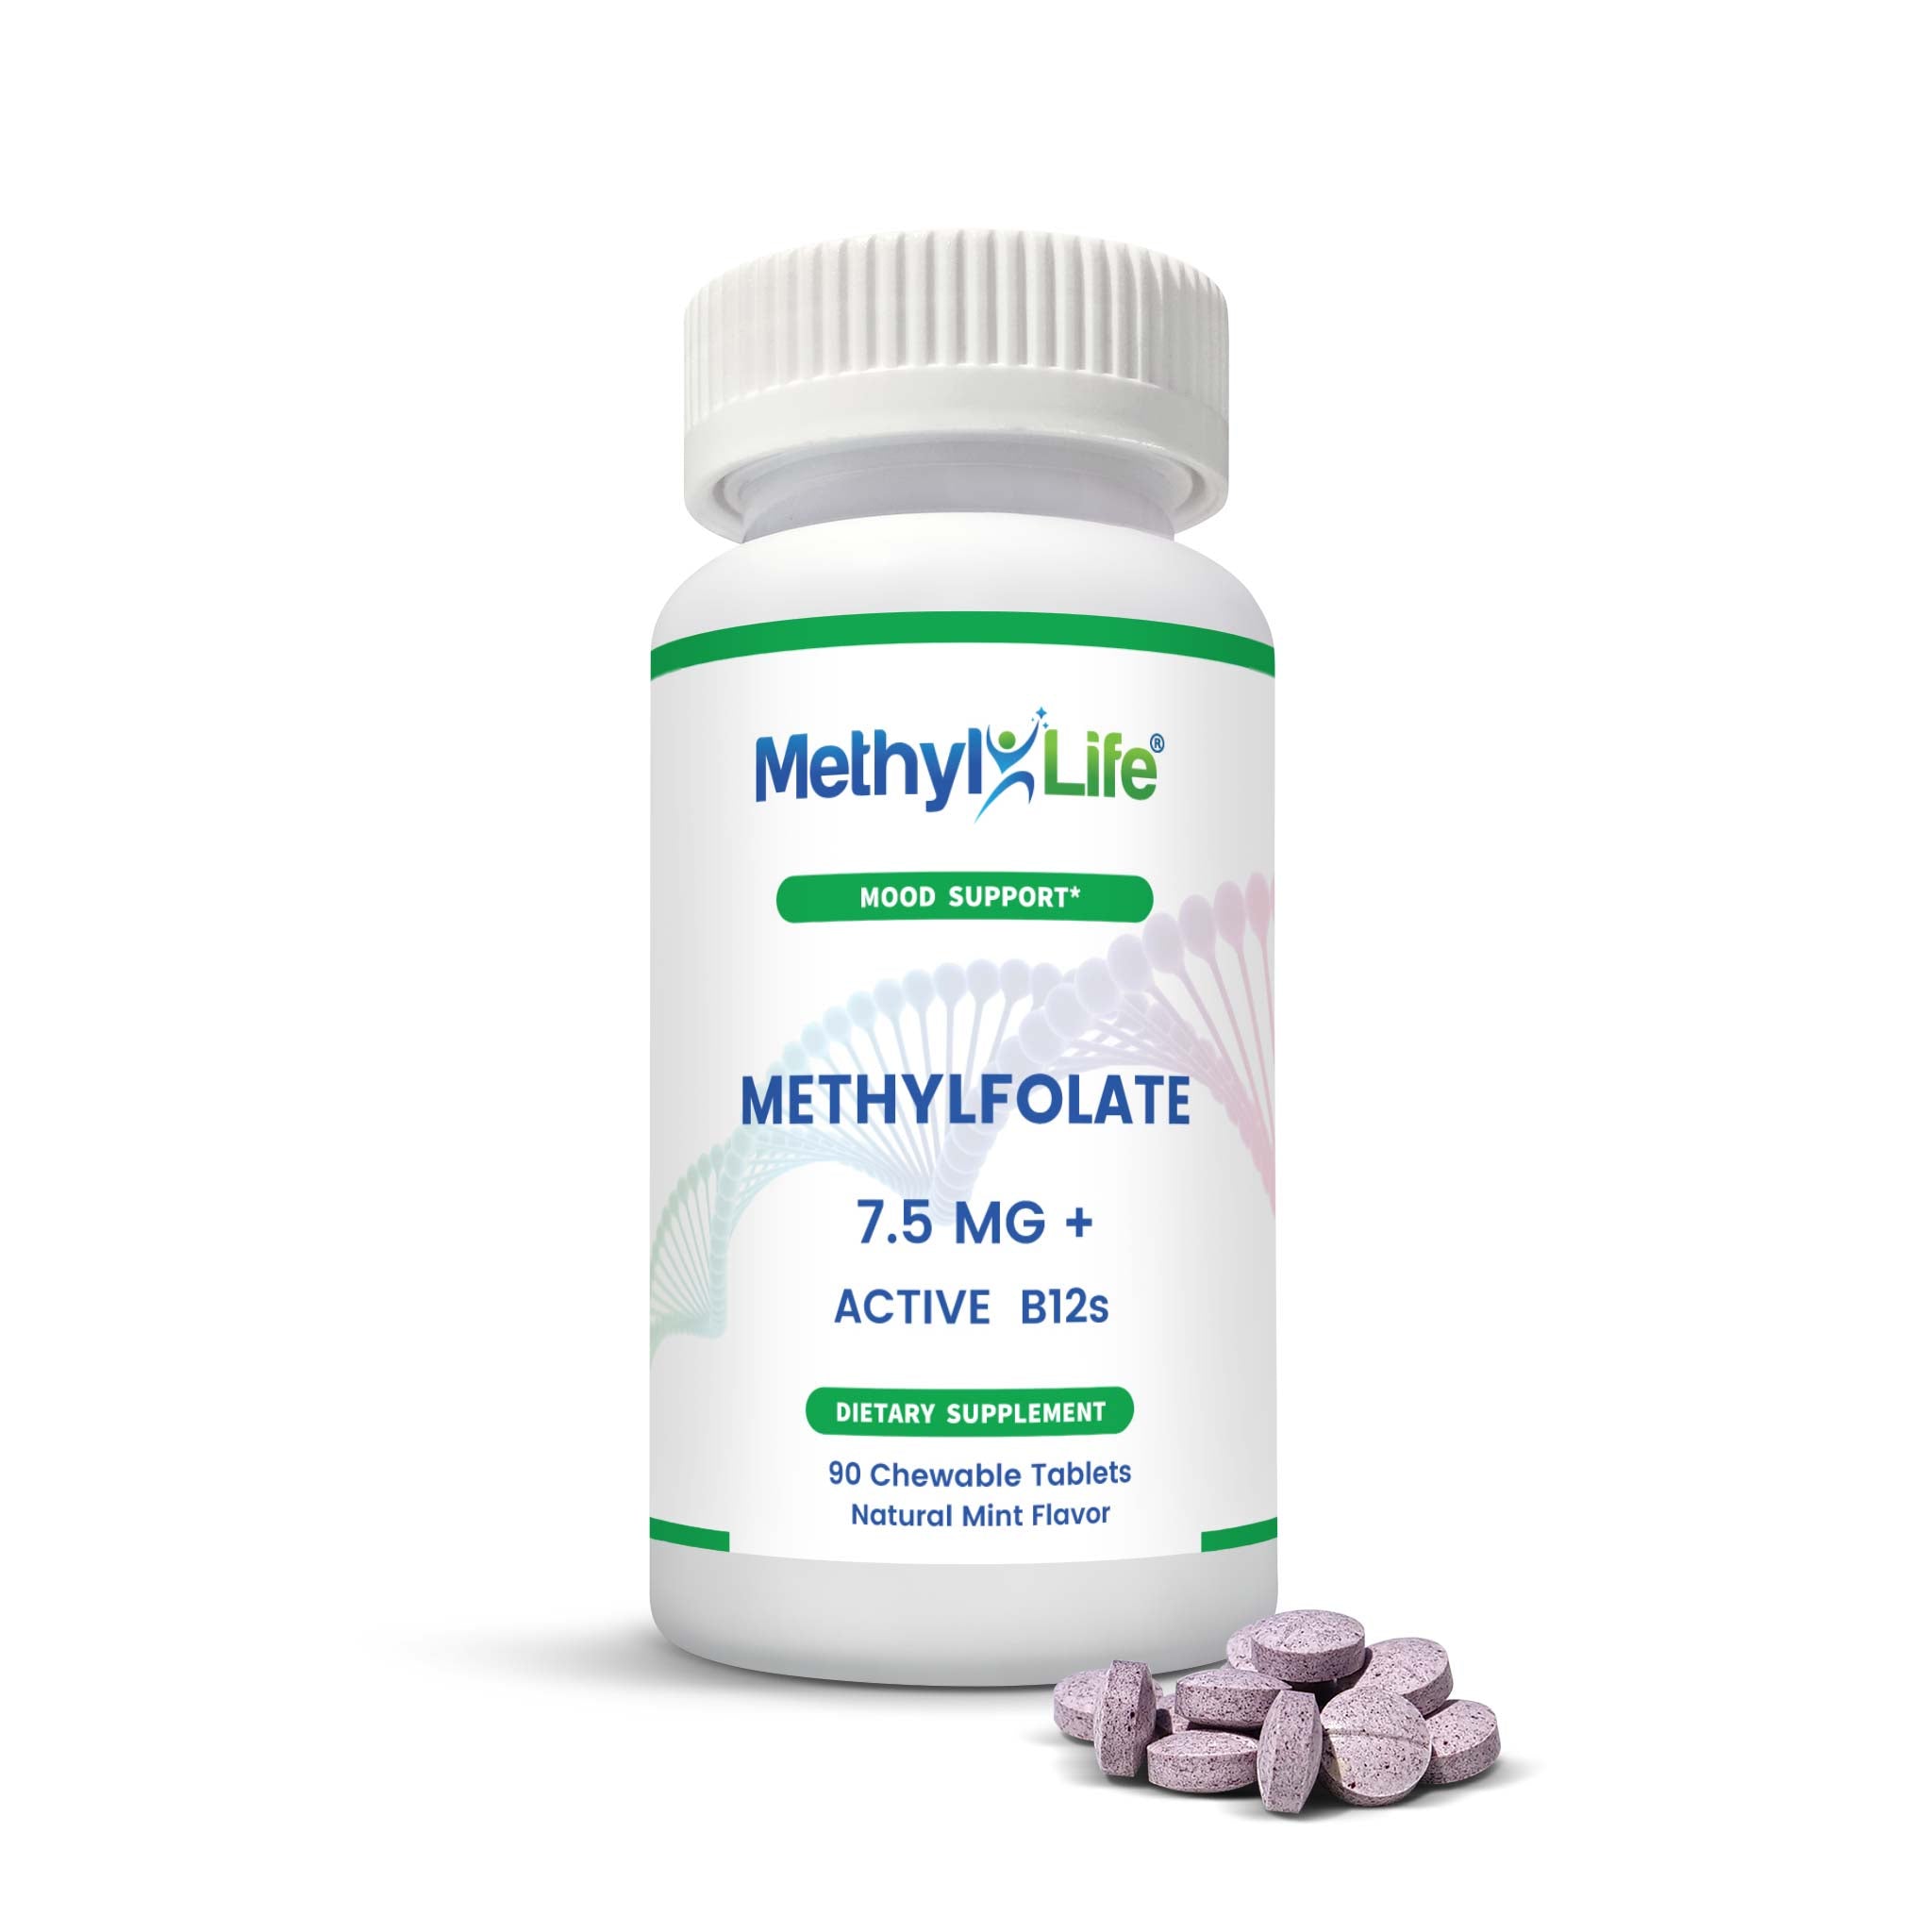 Methylfolate 7.5 mg bottle with chewable tablets (Purest L-Methylfolate) + Active B12s - 90 ct - Methyl-Life